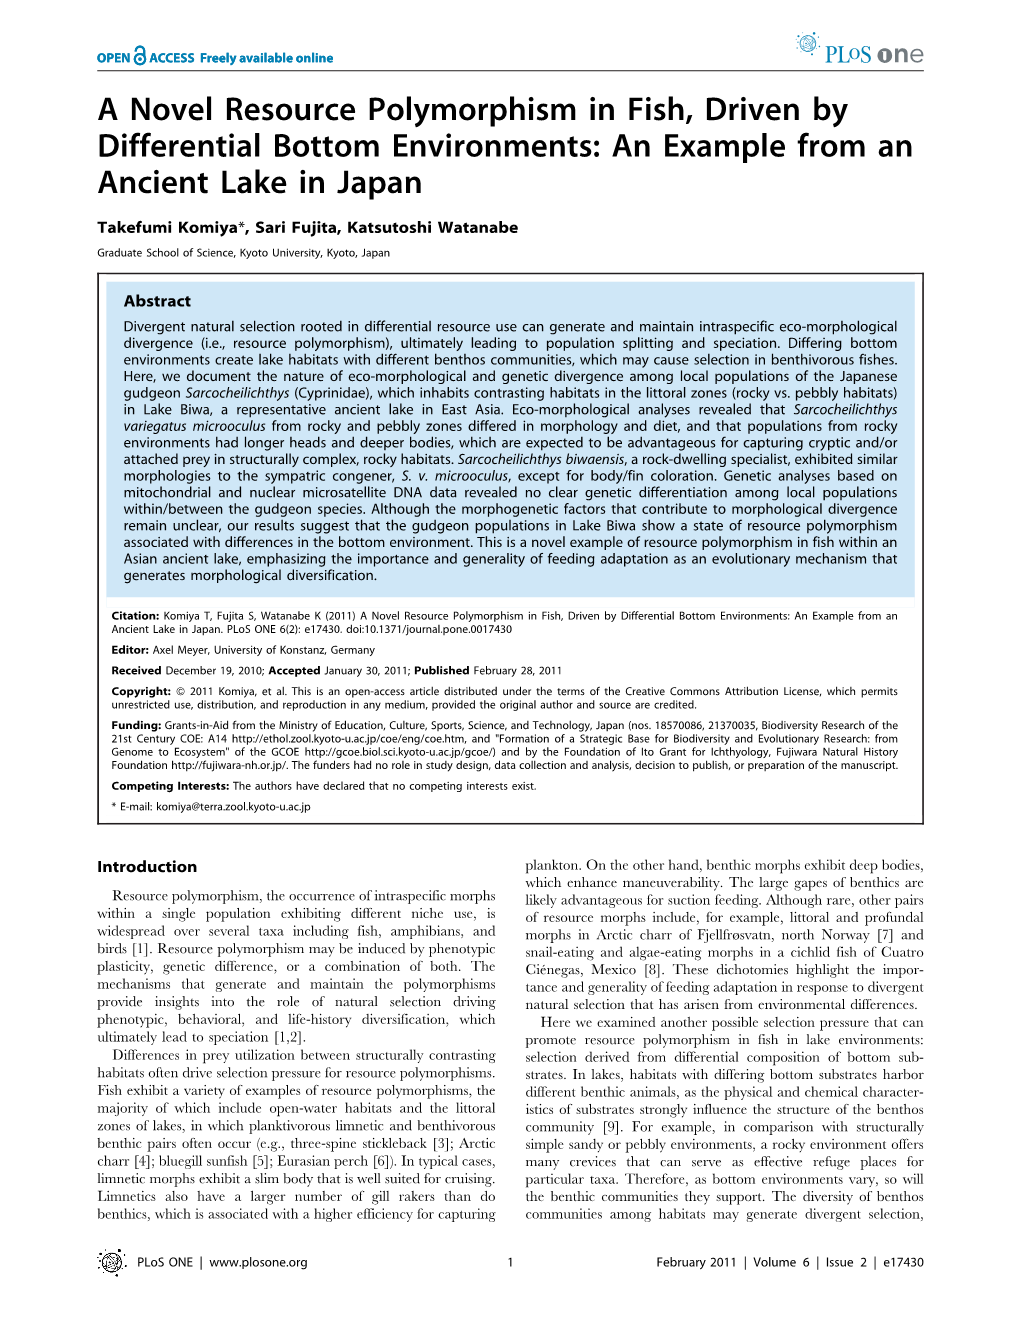 A Novel Resource Polymorphism in Fish, Driven by Differential Bottom Environments: an Example from an Ancient Lake in Japan